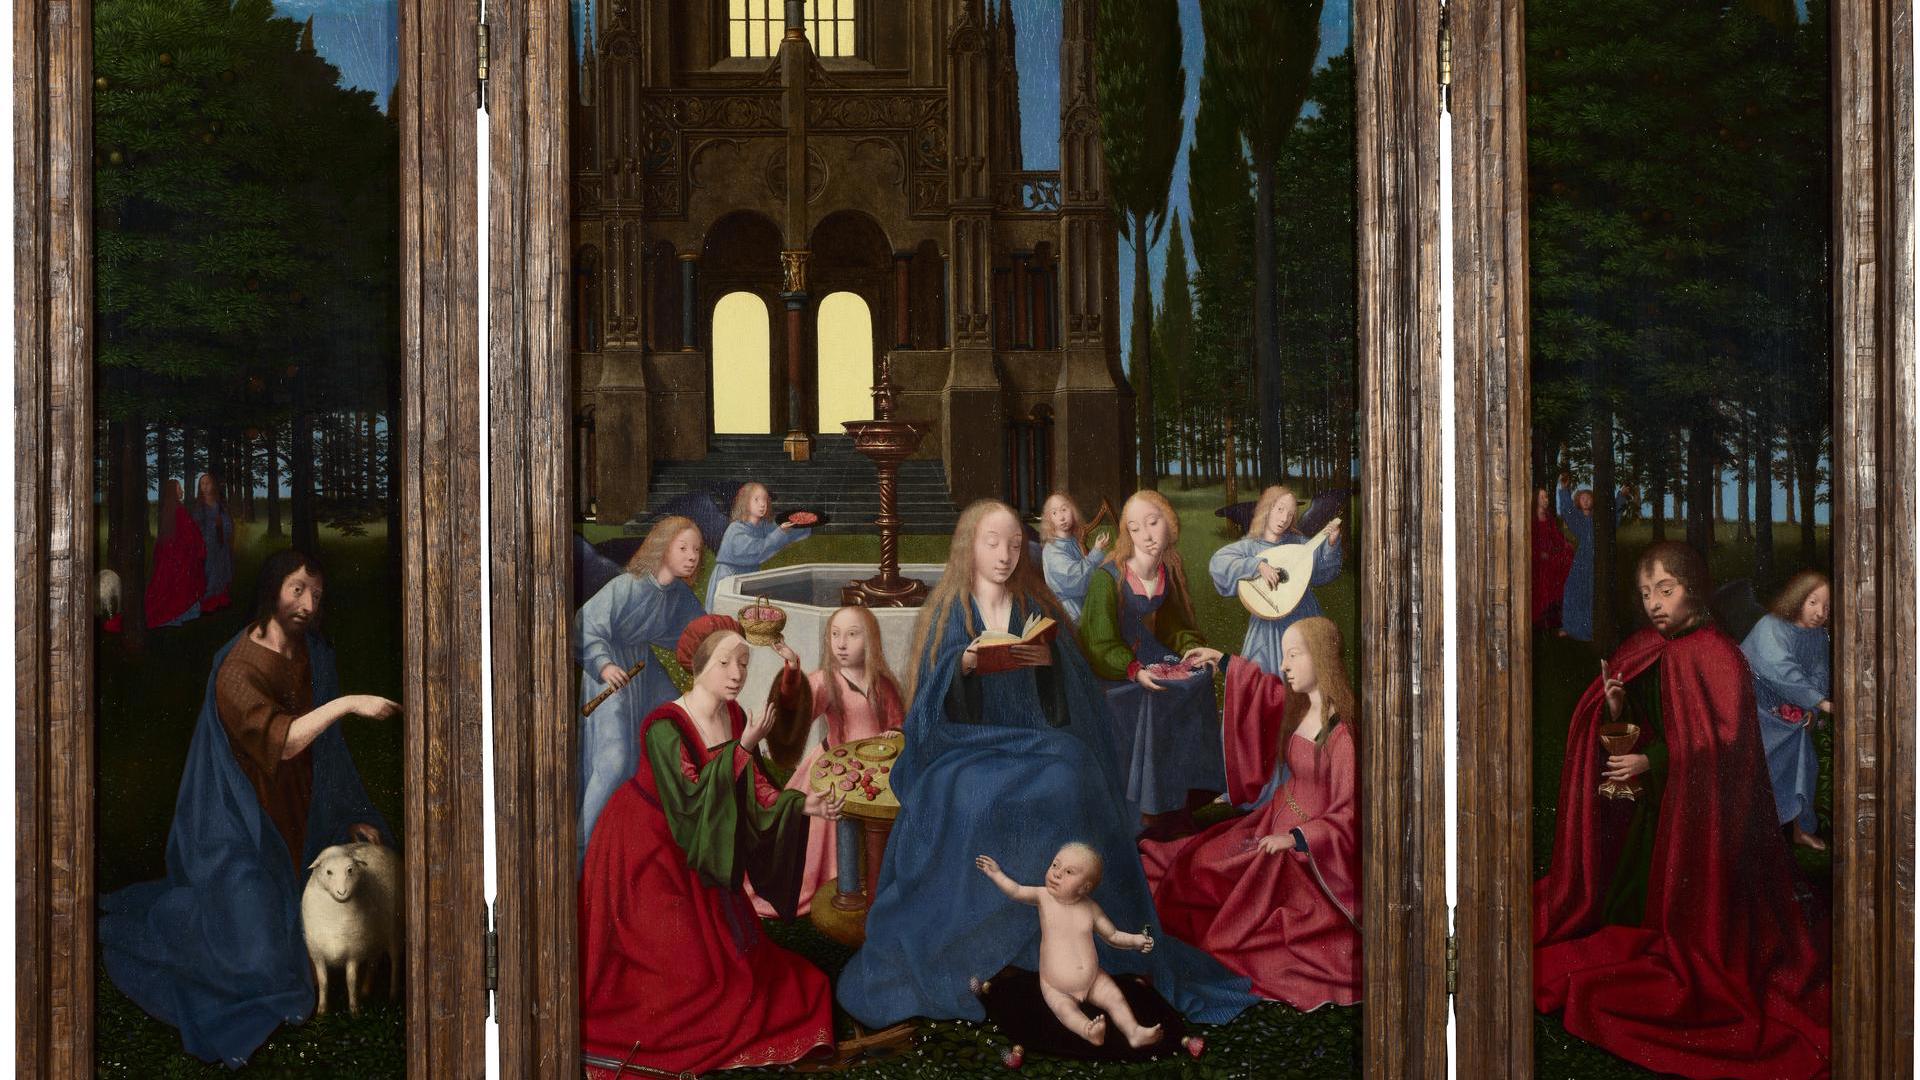 The Virgin and Child with Saints and Angels in a Garden by Follower of Quinten Massys